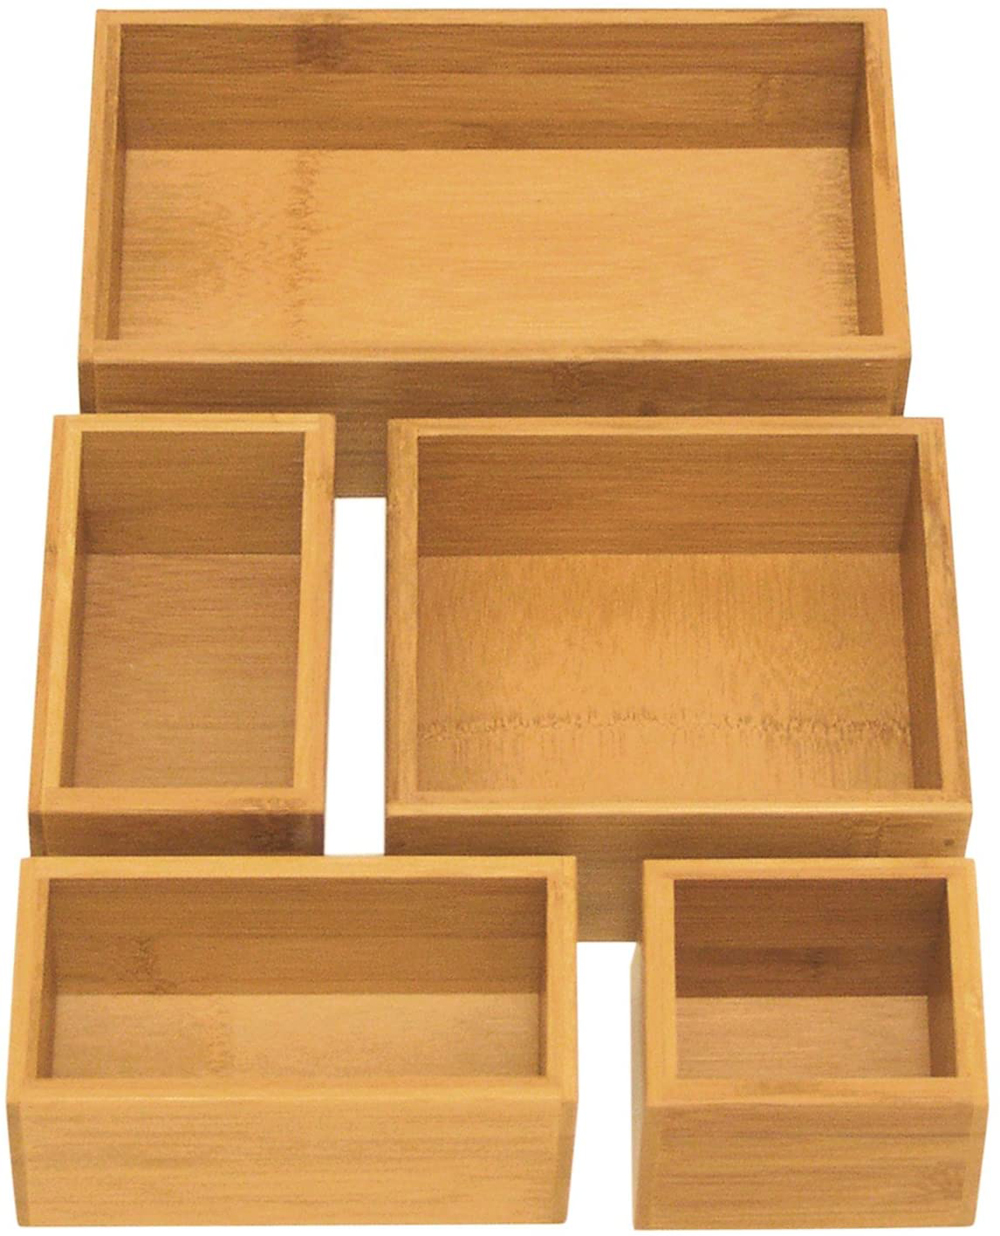 Five-piece bamboo storage containers in various sizes